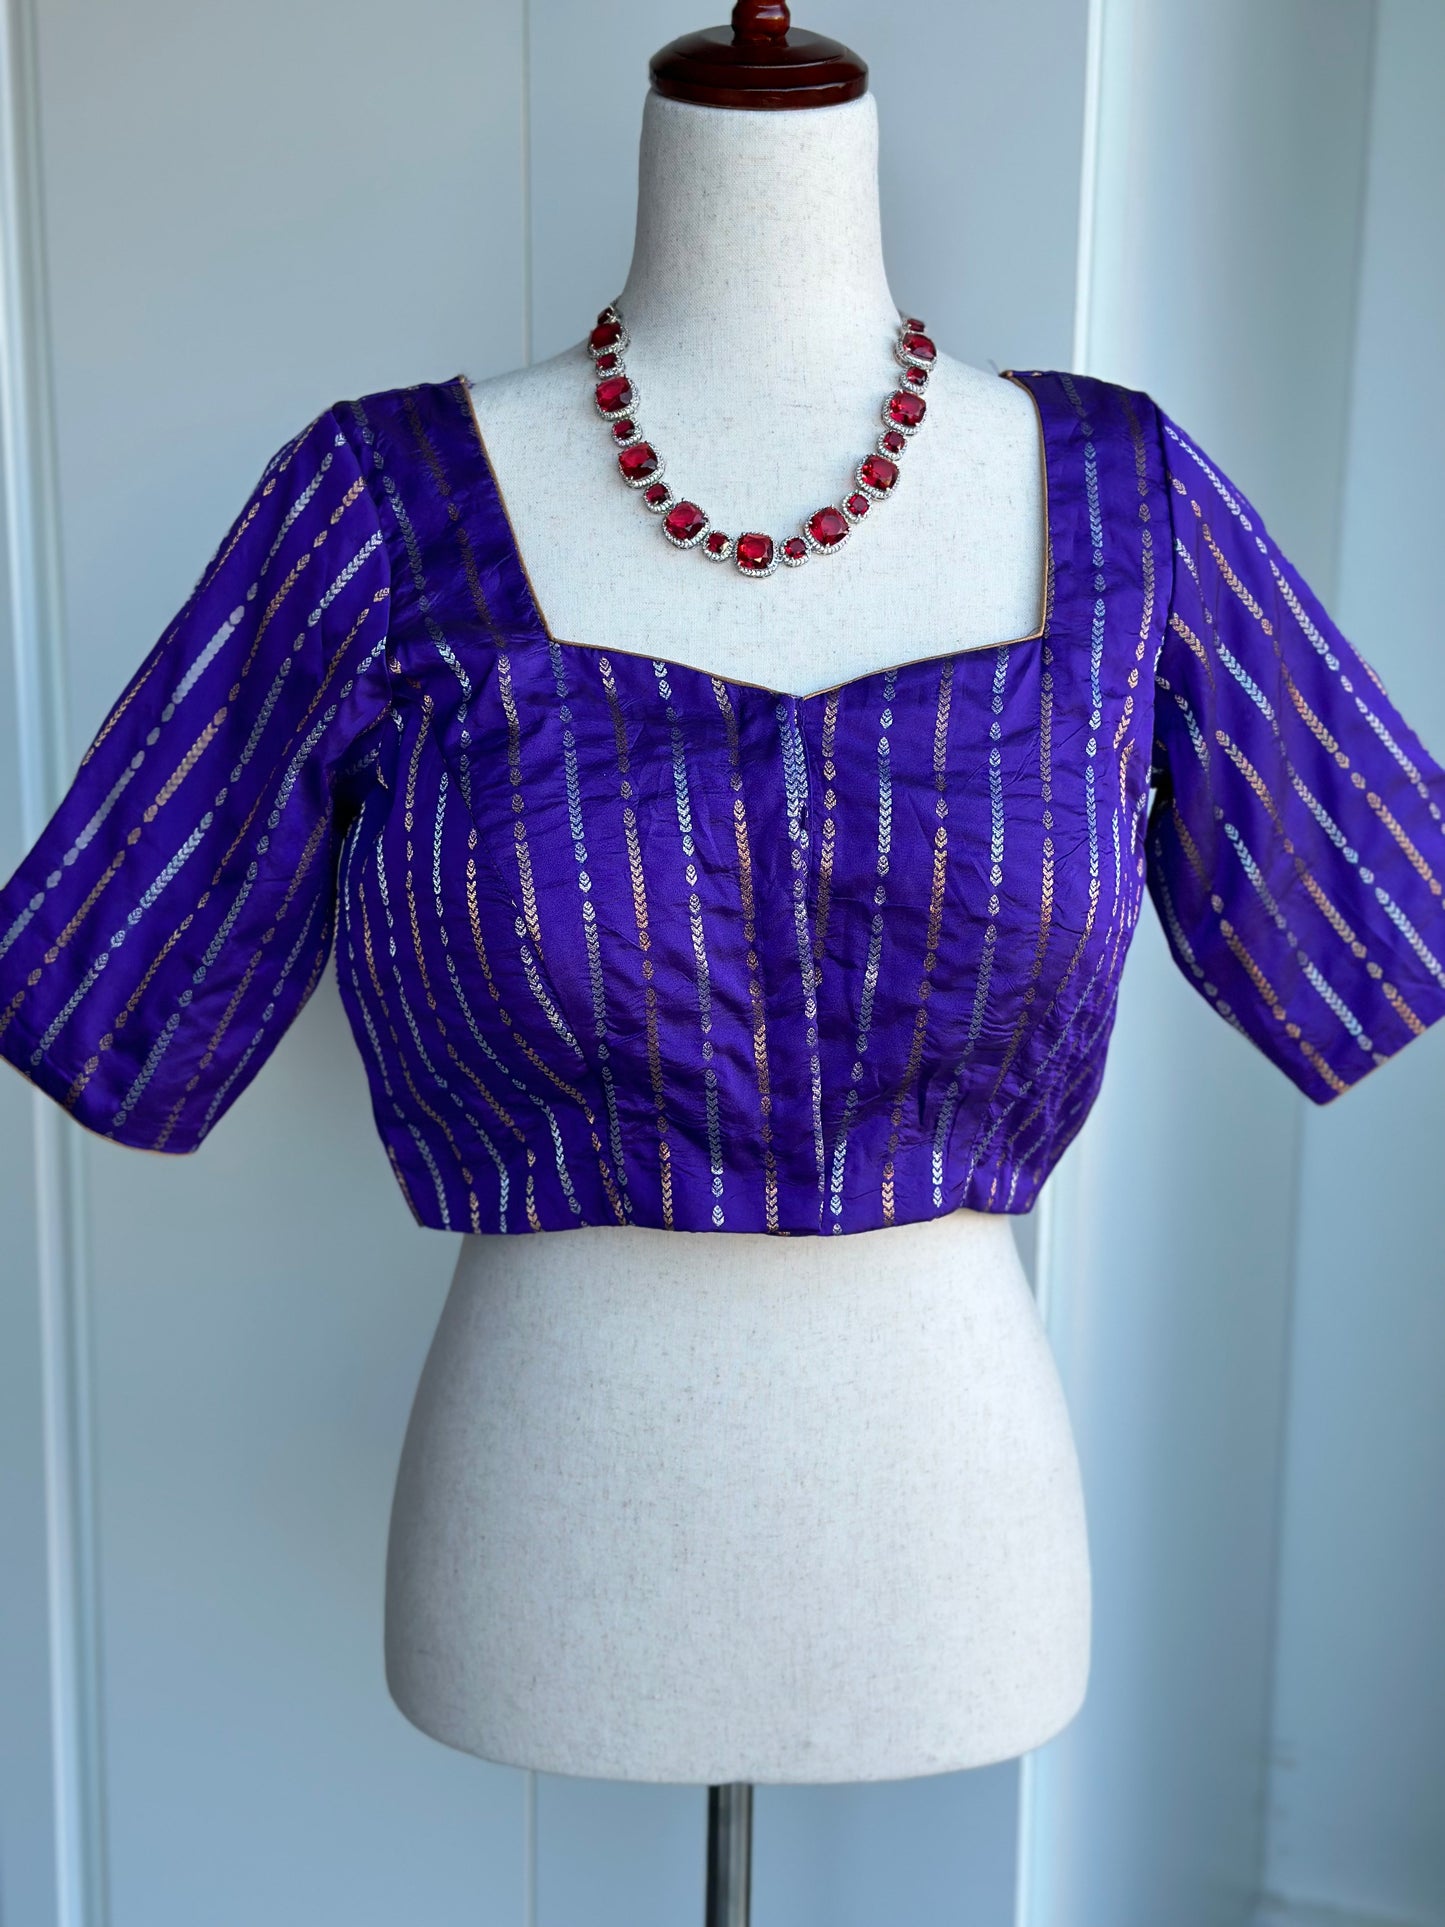 Purple silver & gold brocade blouse | Saree blouses in USA